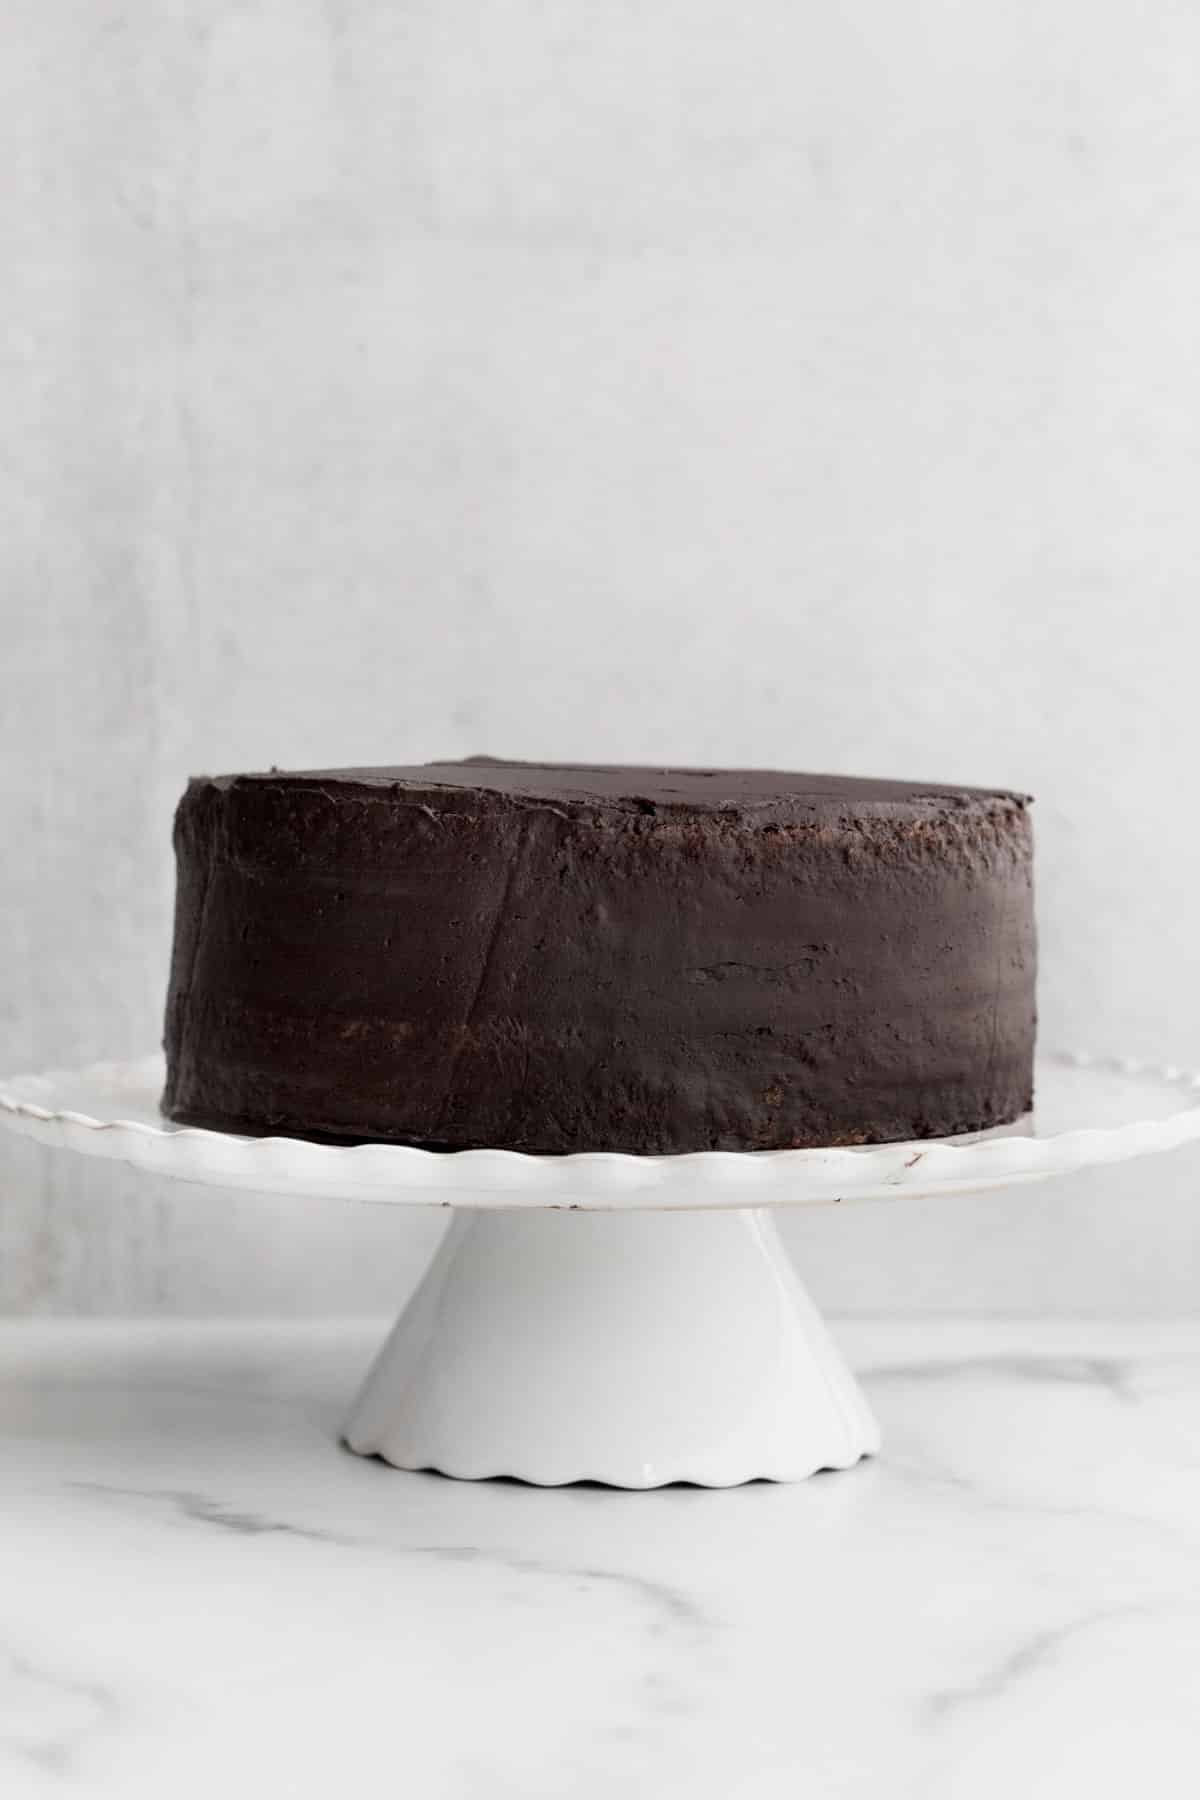 Thinly frosted chocolate cake on a stand.